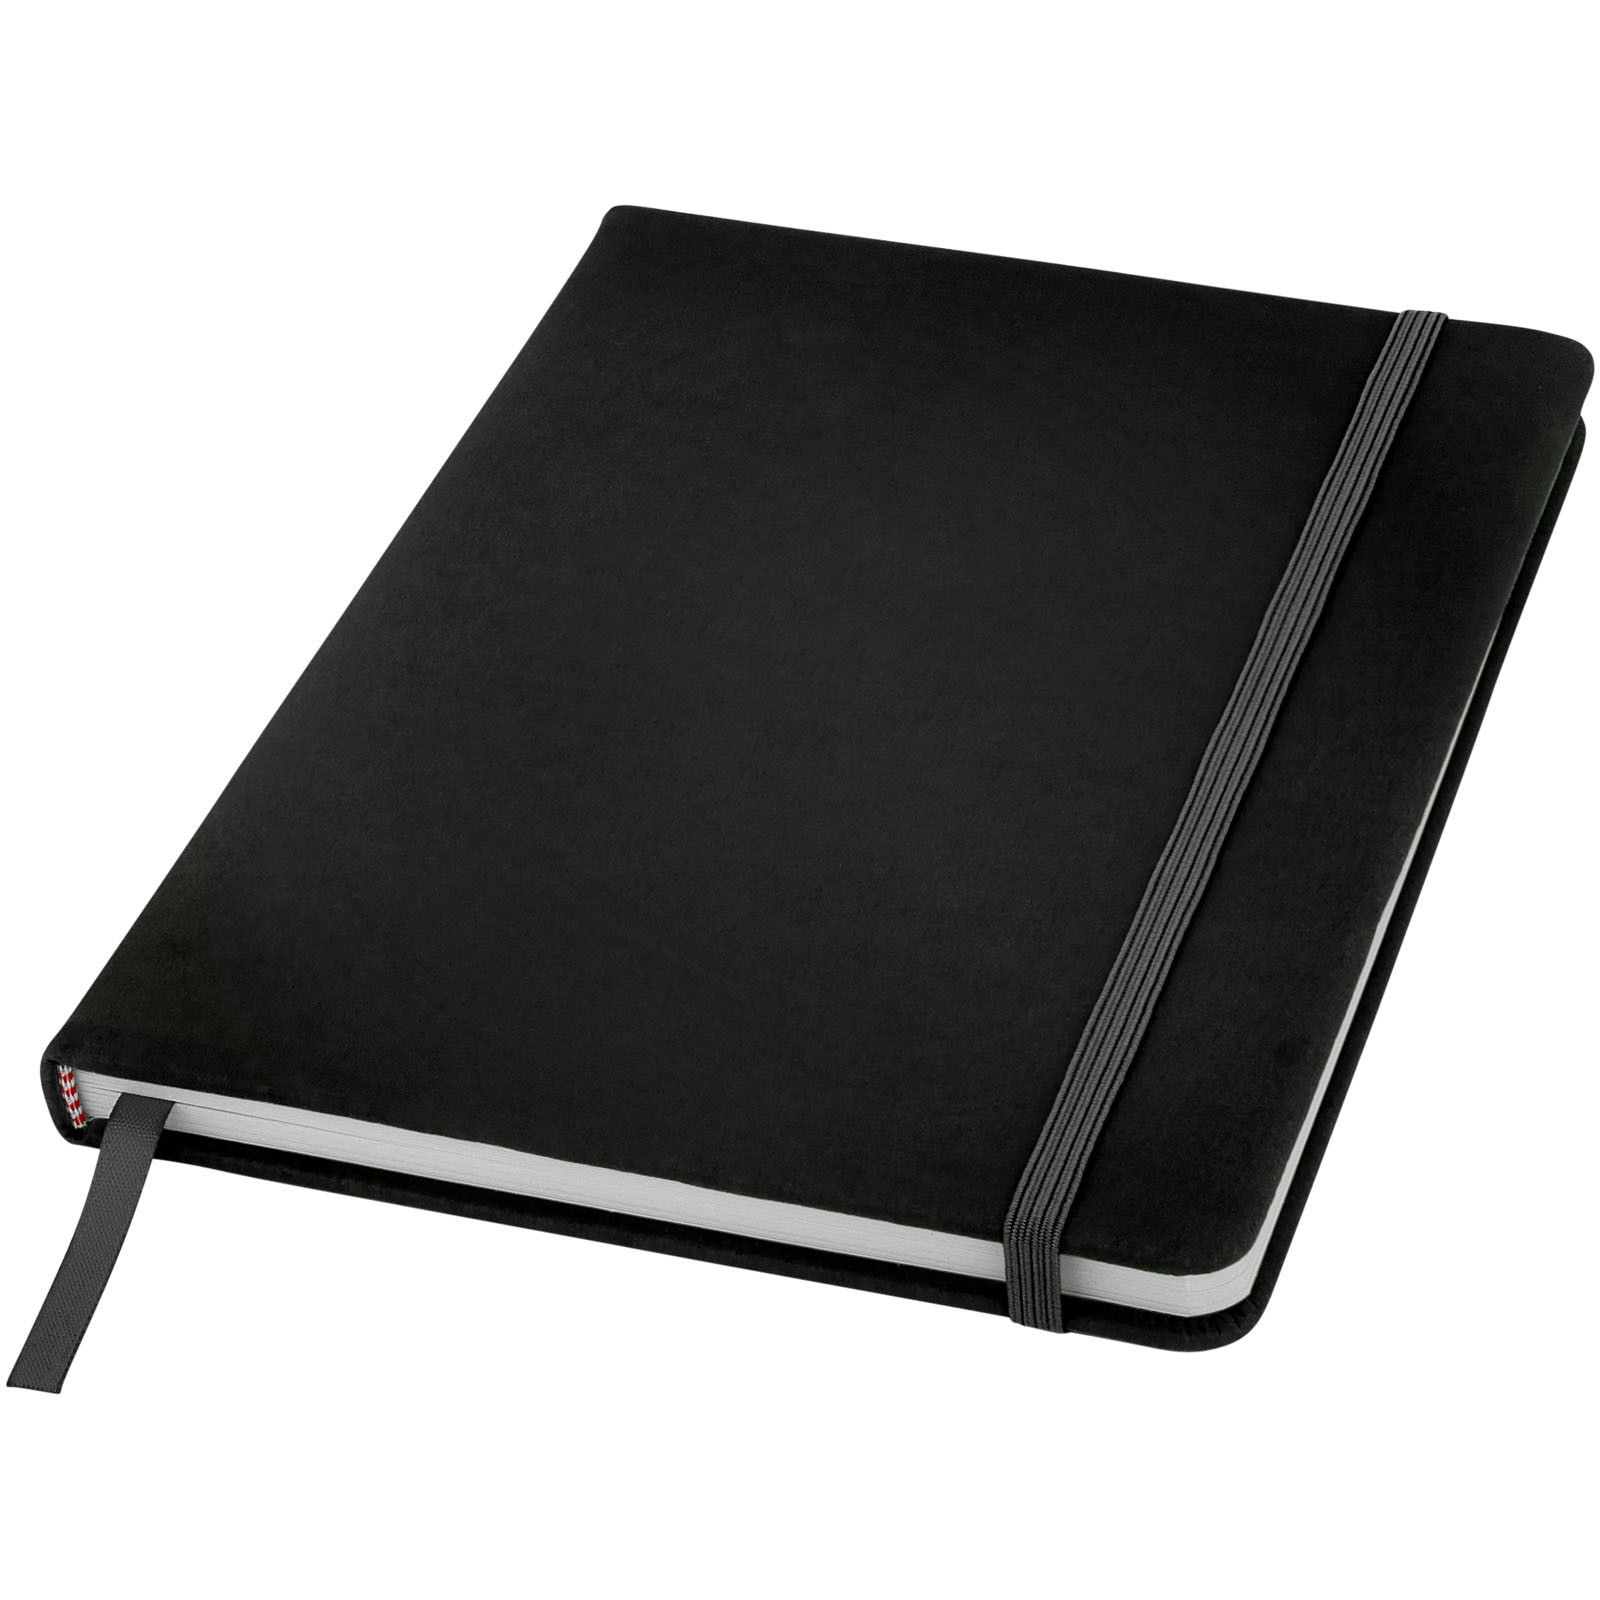 Spectrum A5 notebook with dotted pages - Solid Black